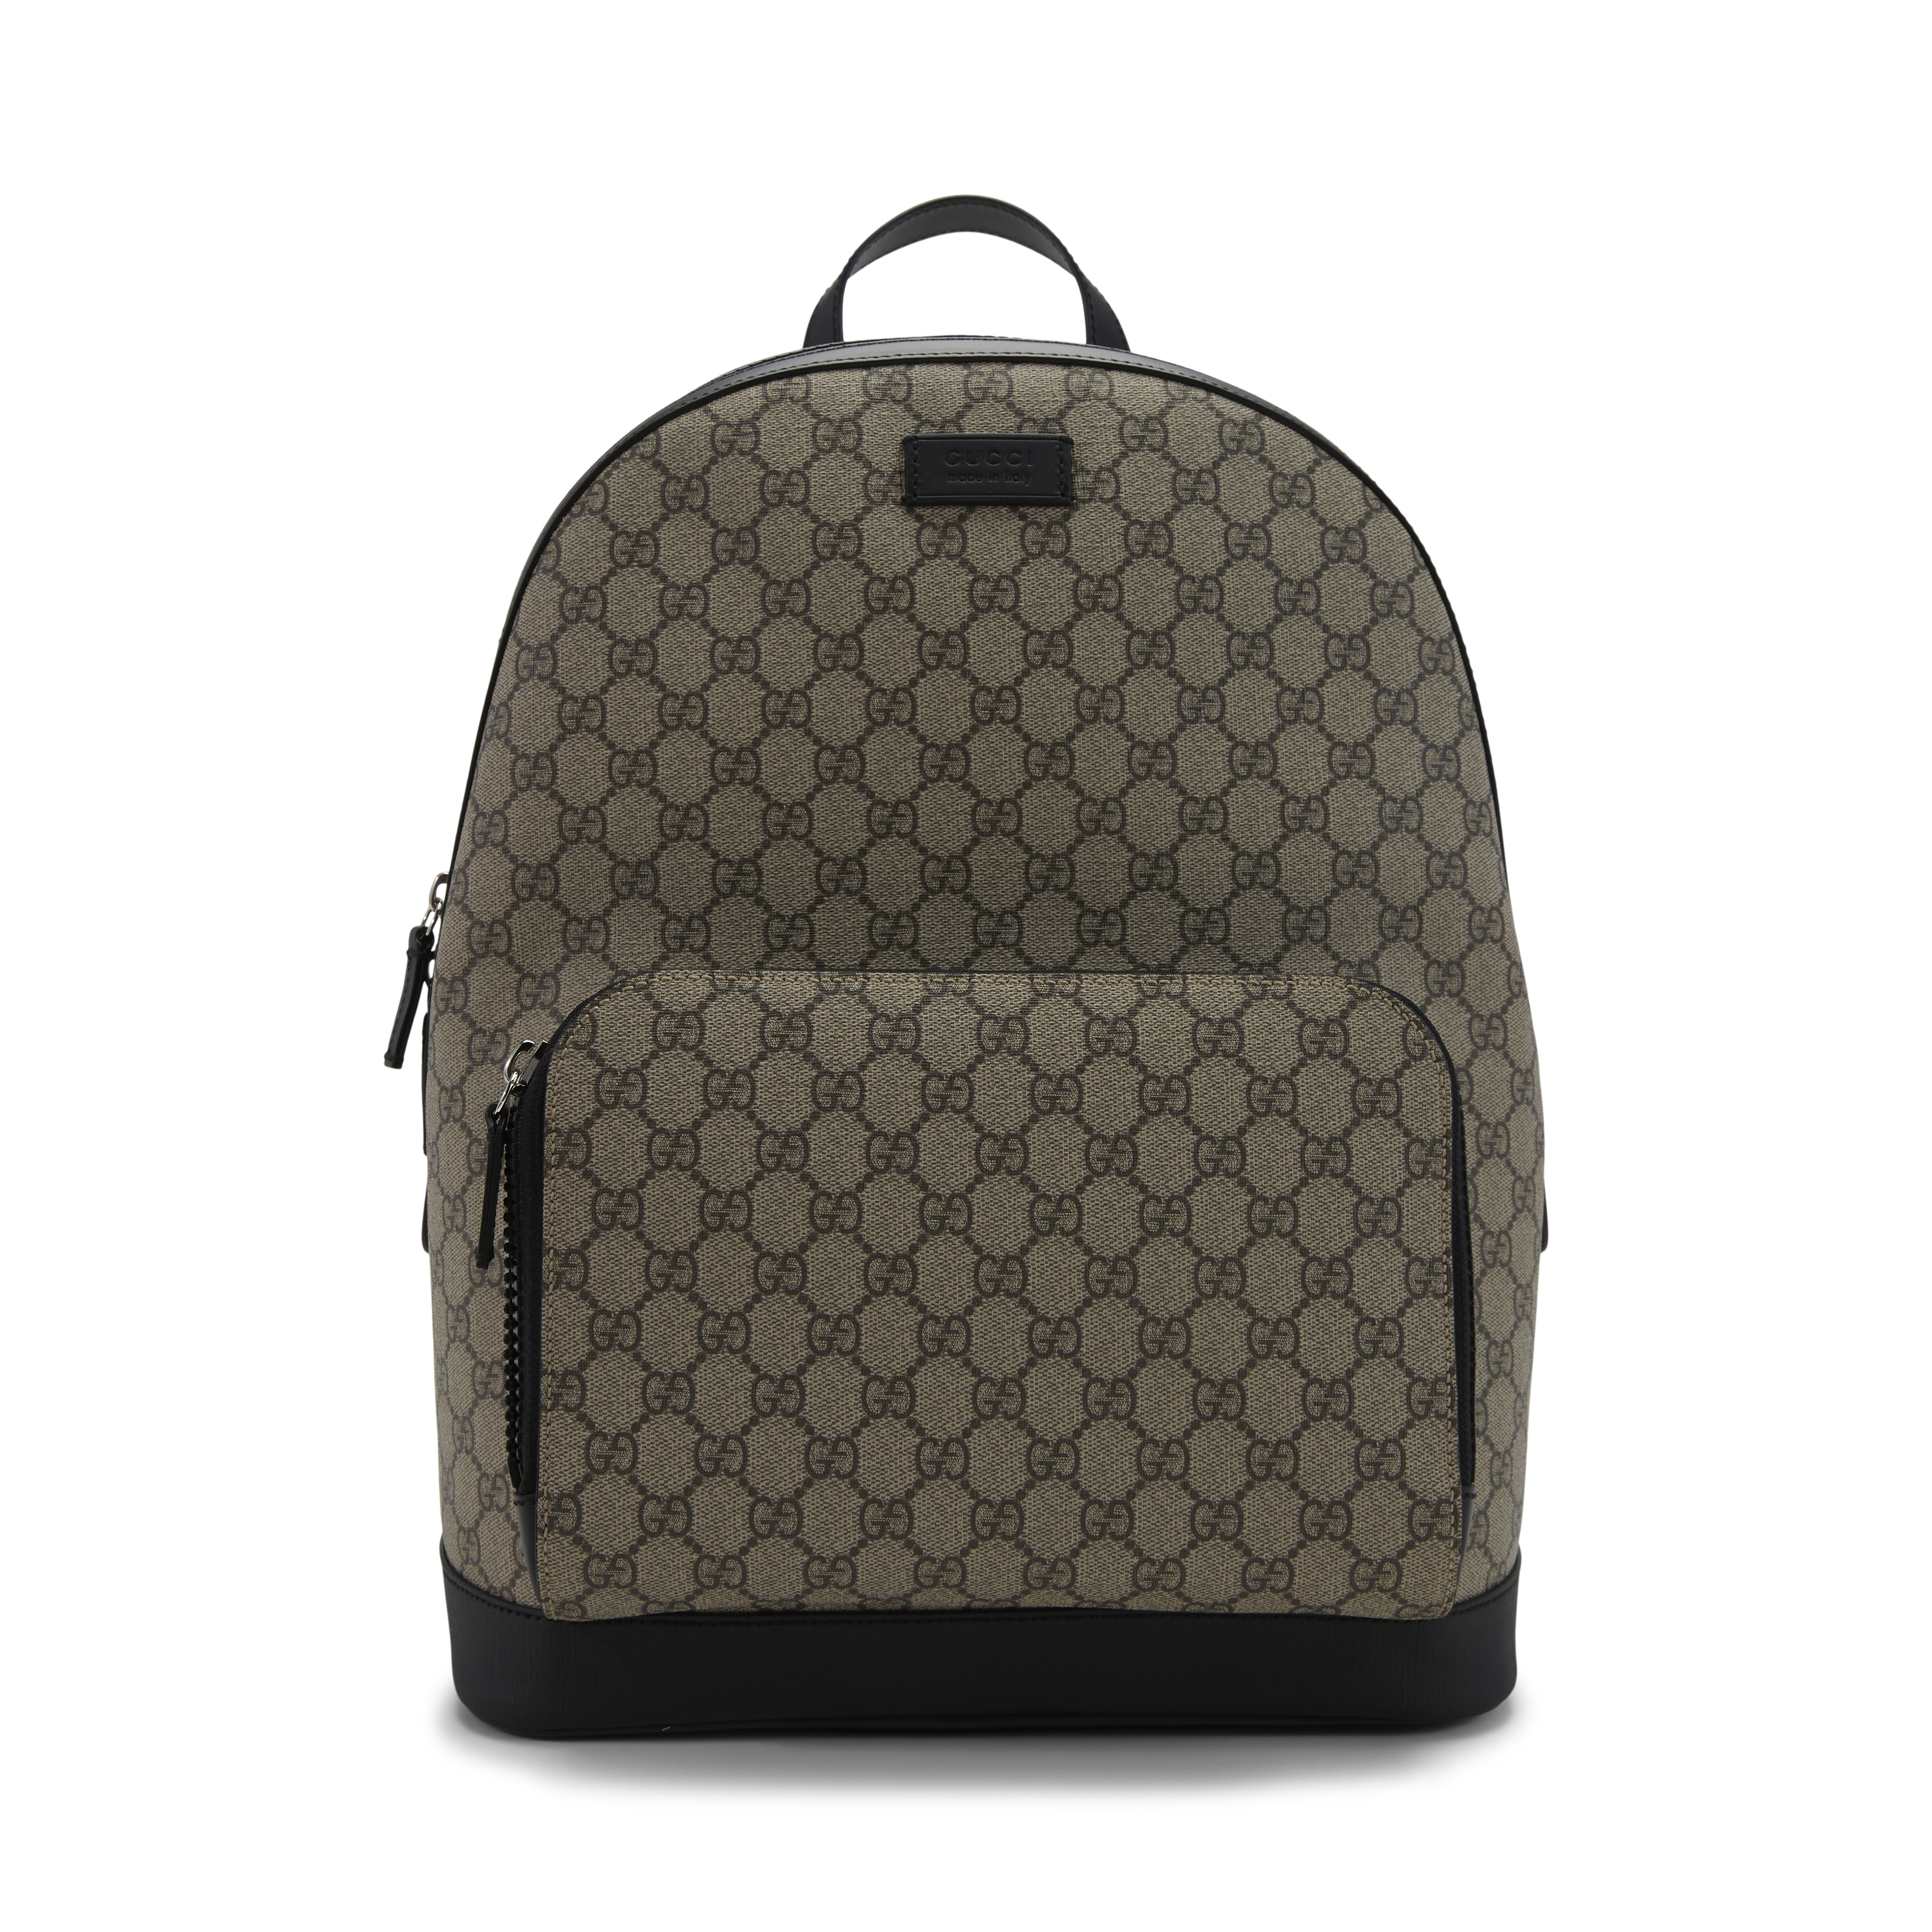 Gucci GG Supreme Backpack Front Zipper 